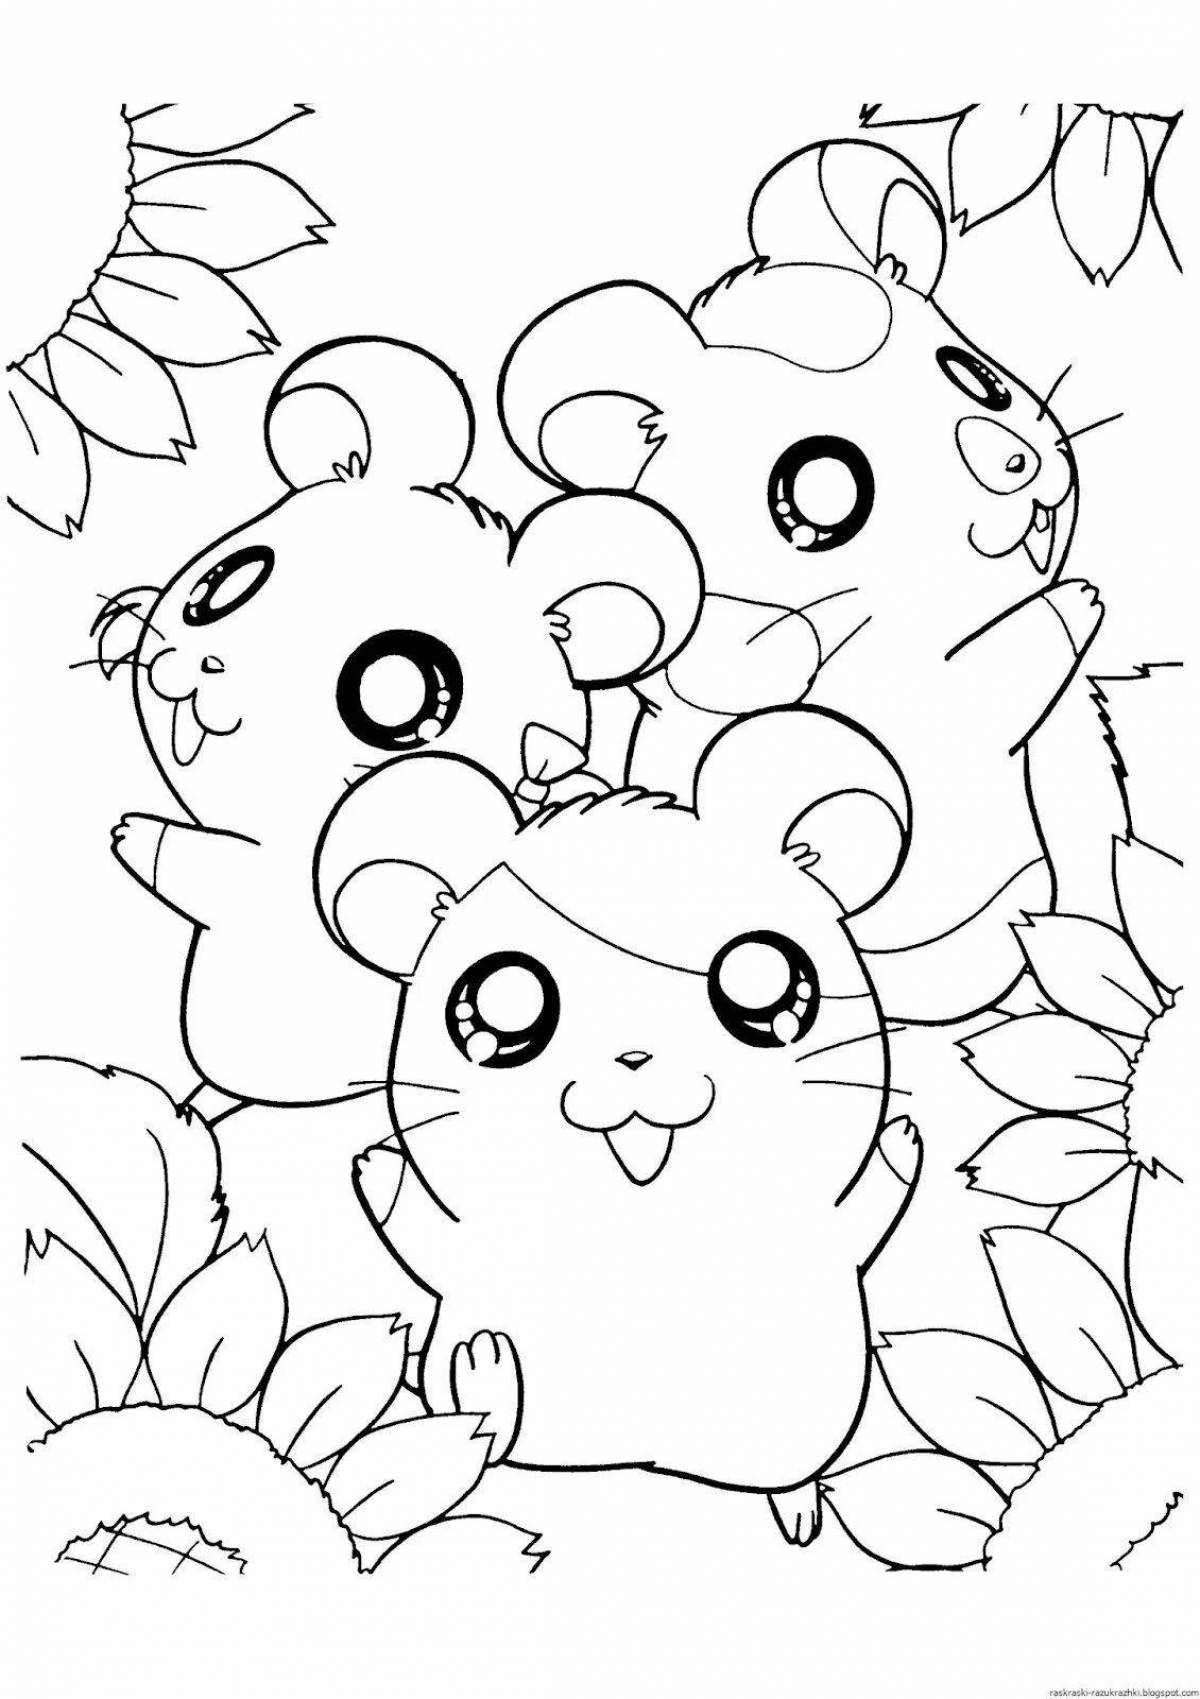 Cute hamsters coloring pages